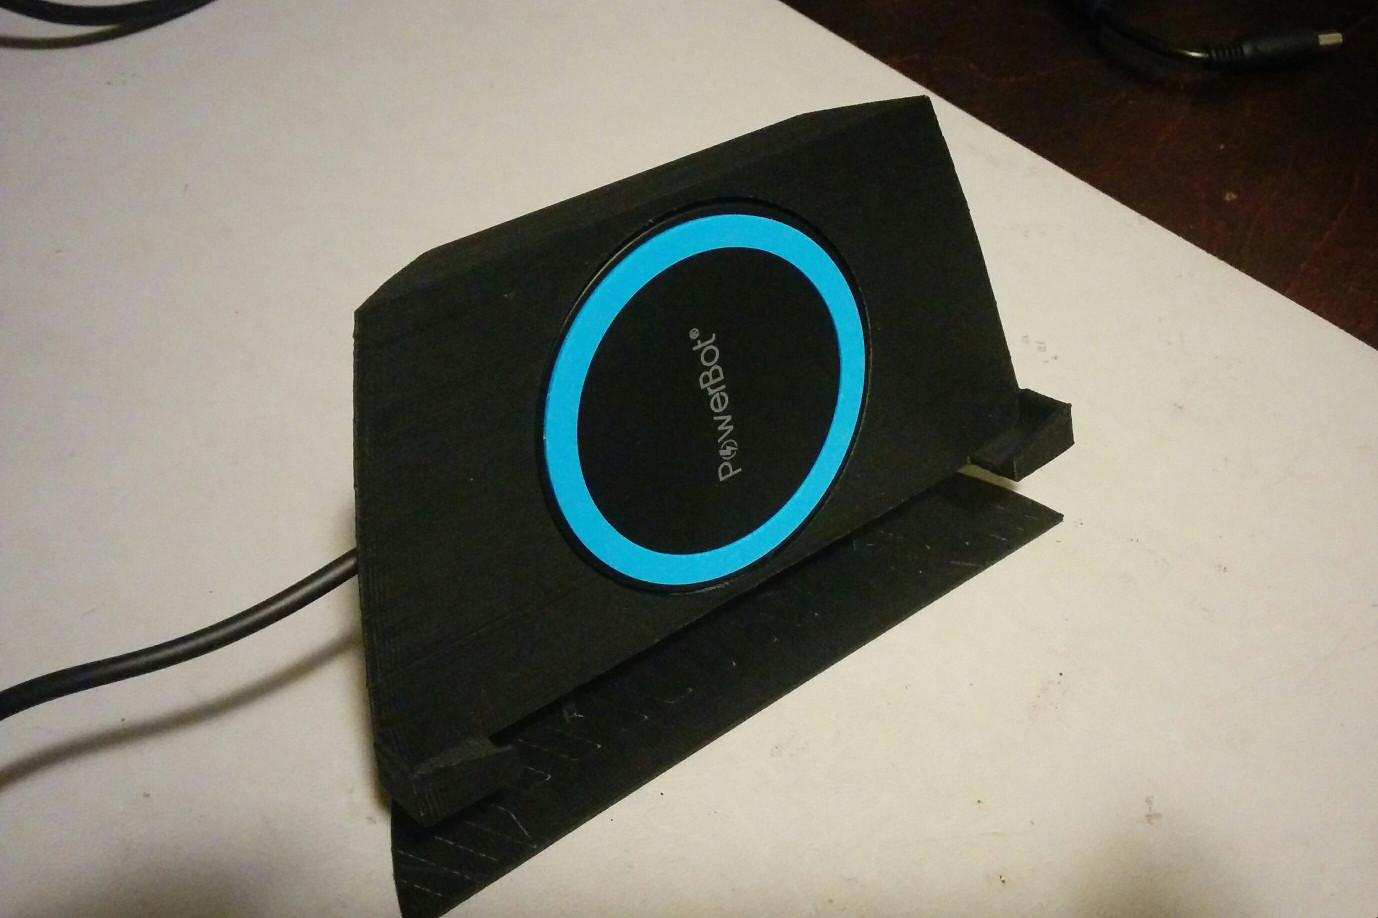 Qi Charging Stand